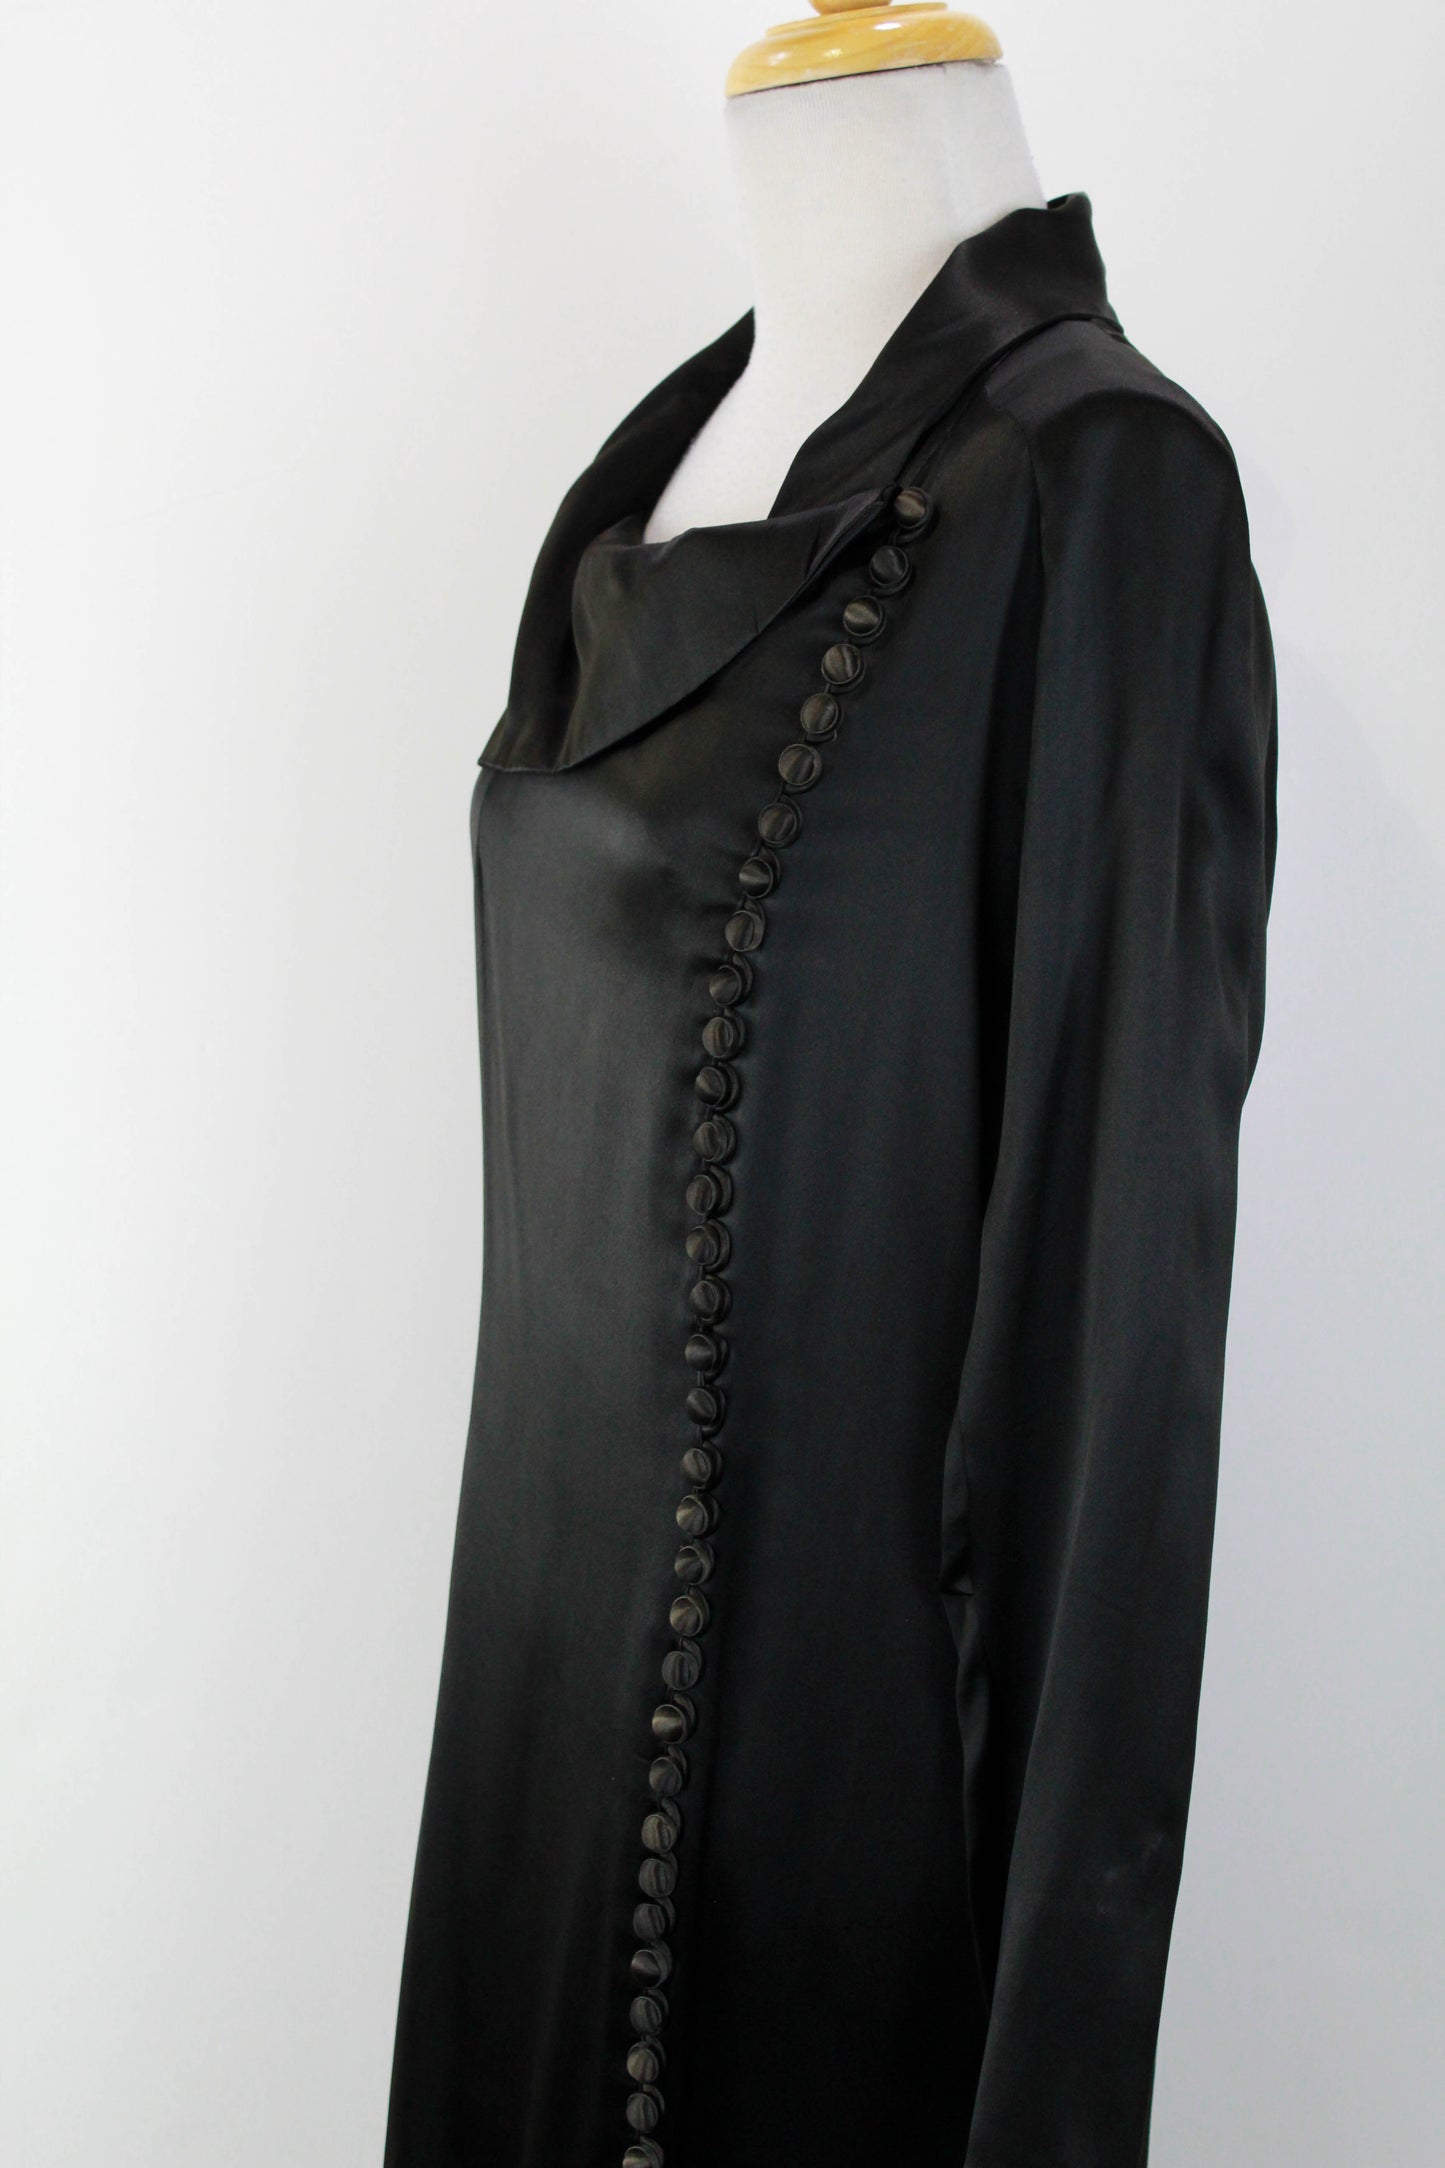 1930s silk satin black dress, art deco 30s vintage dress long sleeves covered buttons ian drummond collection 